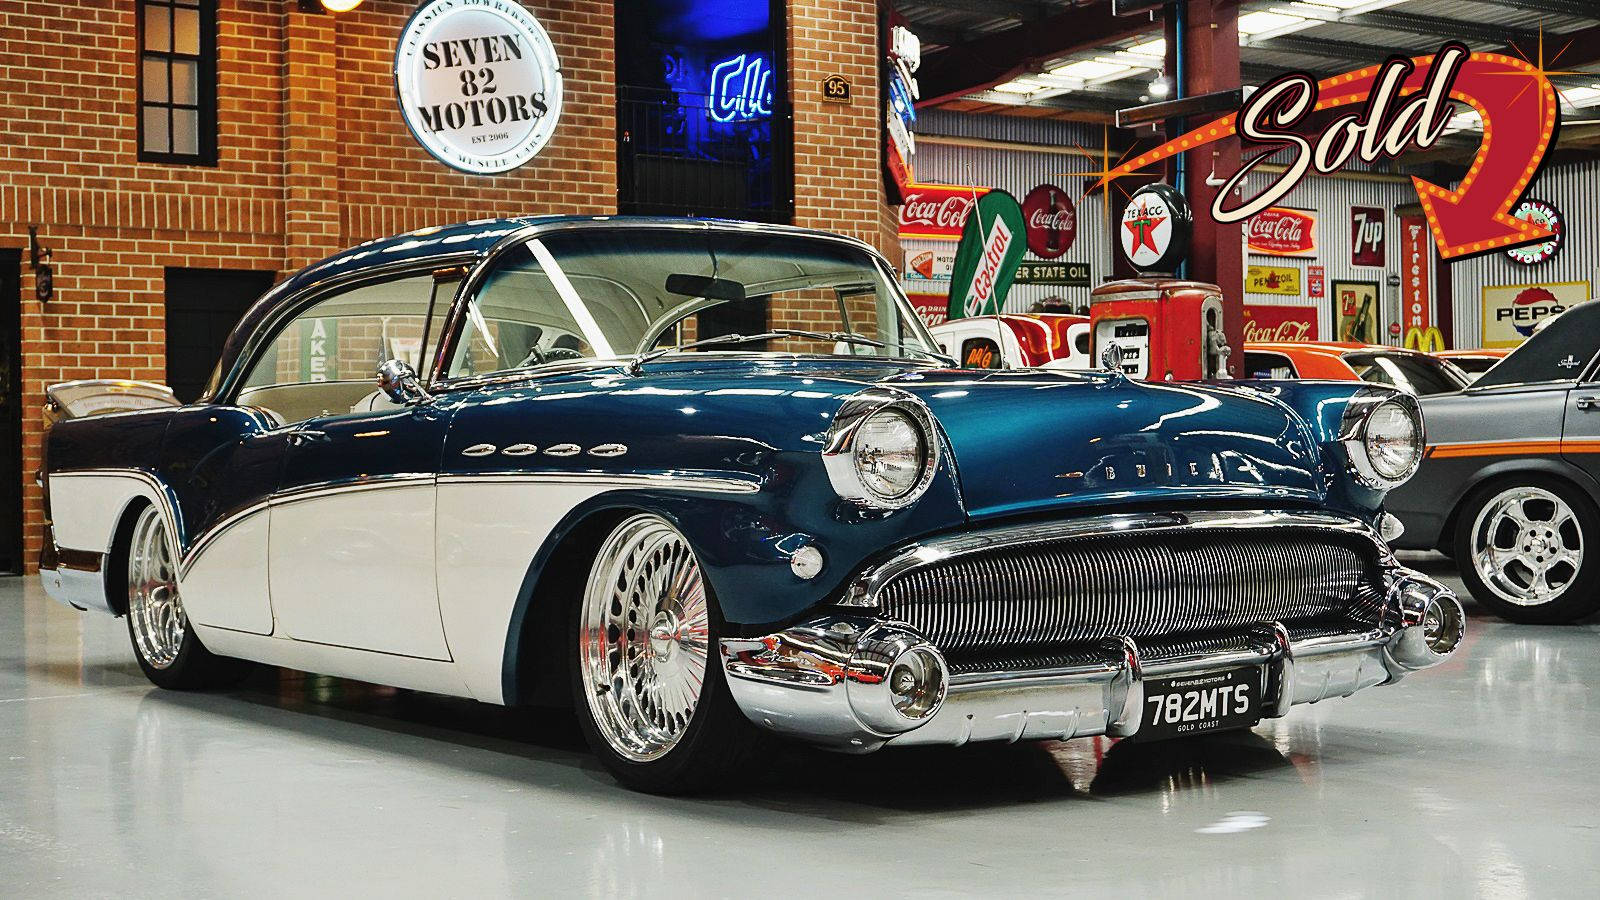 Elegant Restored Buick Special Showcased In An Upscale Showroom Background